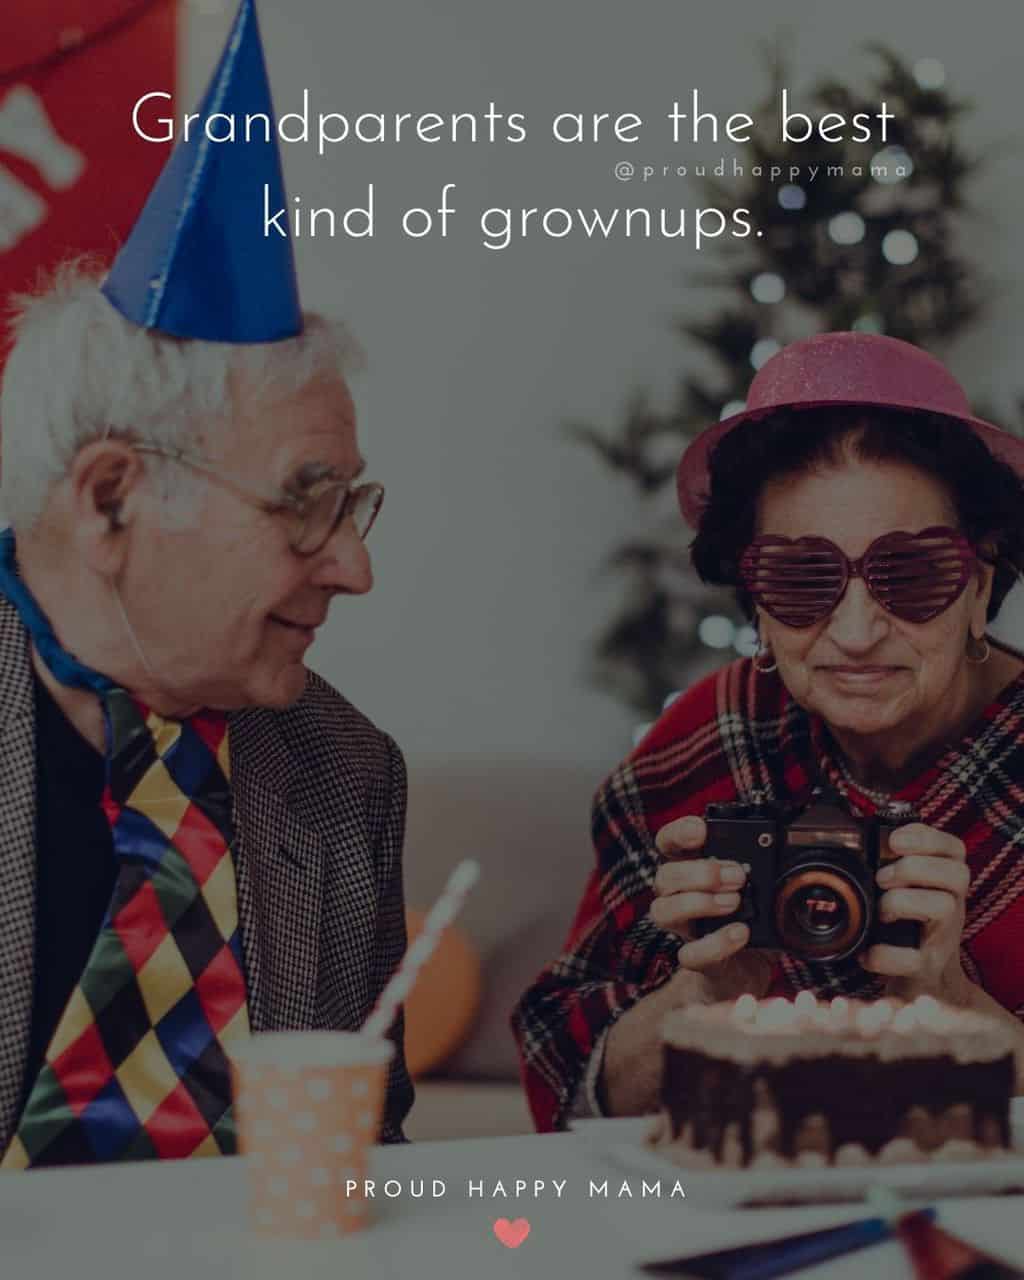 Grandparent Quotes – Grandparents are the best kind of grownups.’